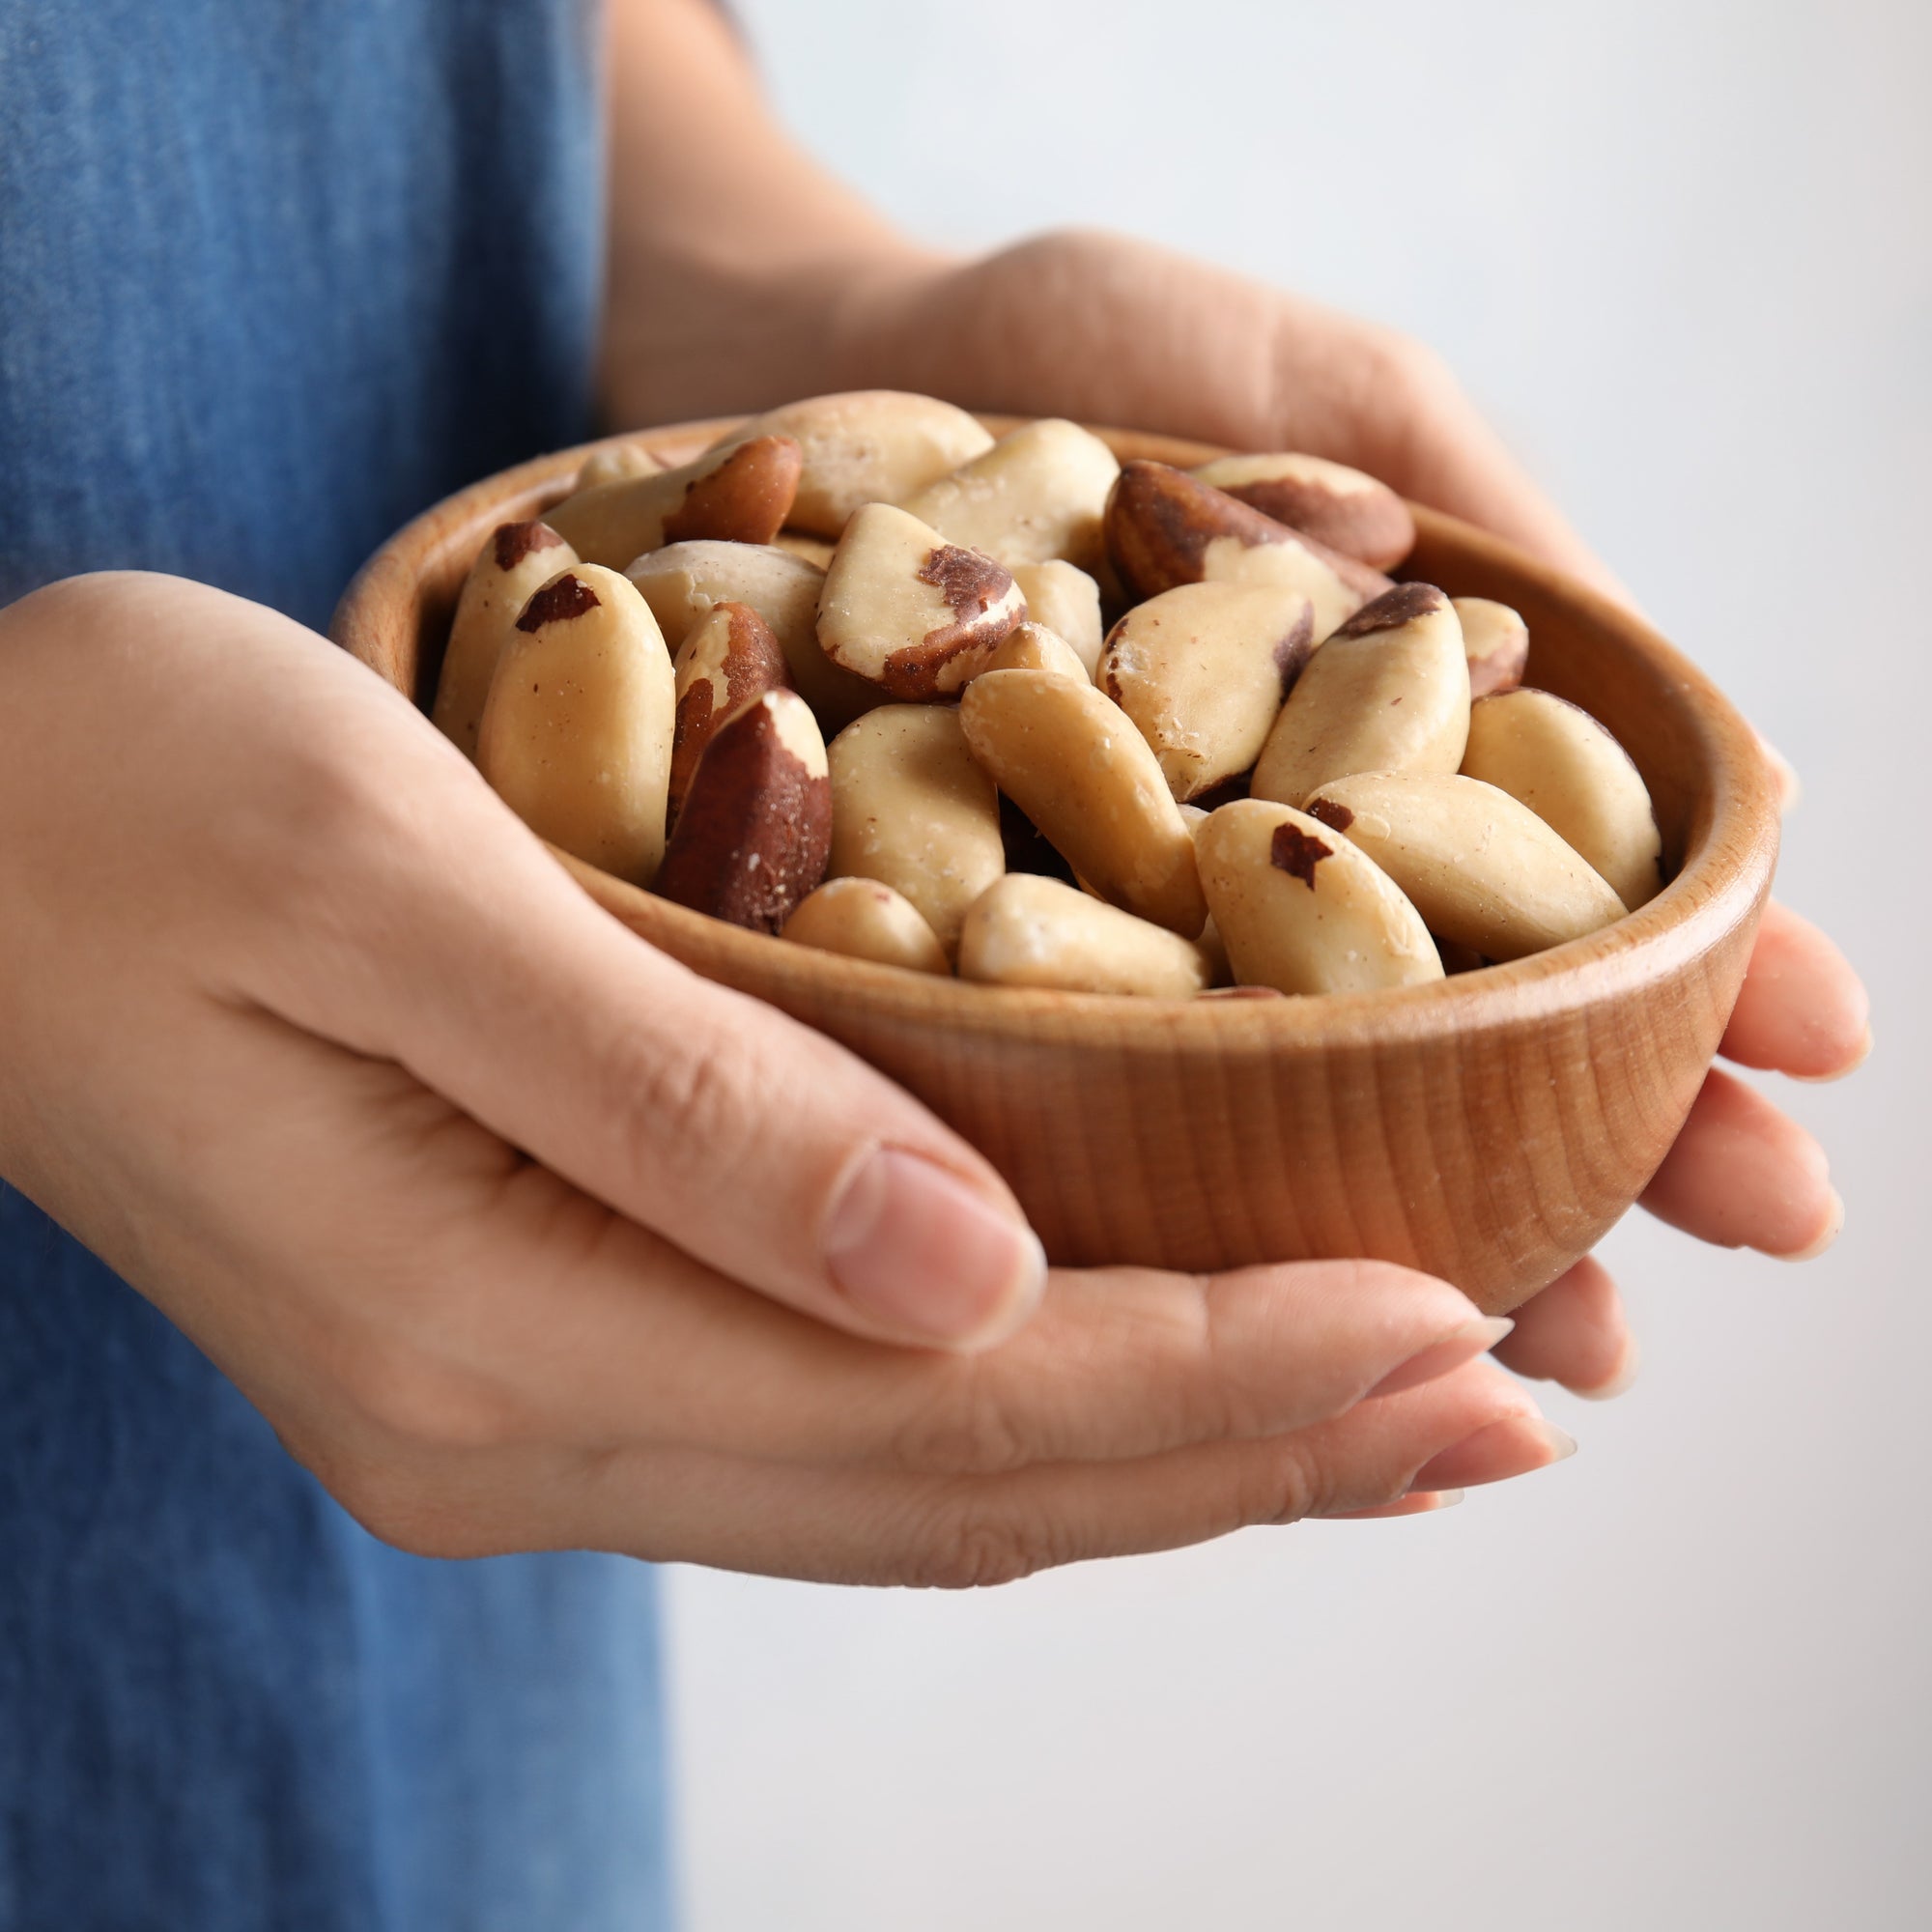 What are the Health Benefits of Brazil Nuts?